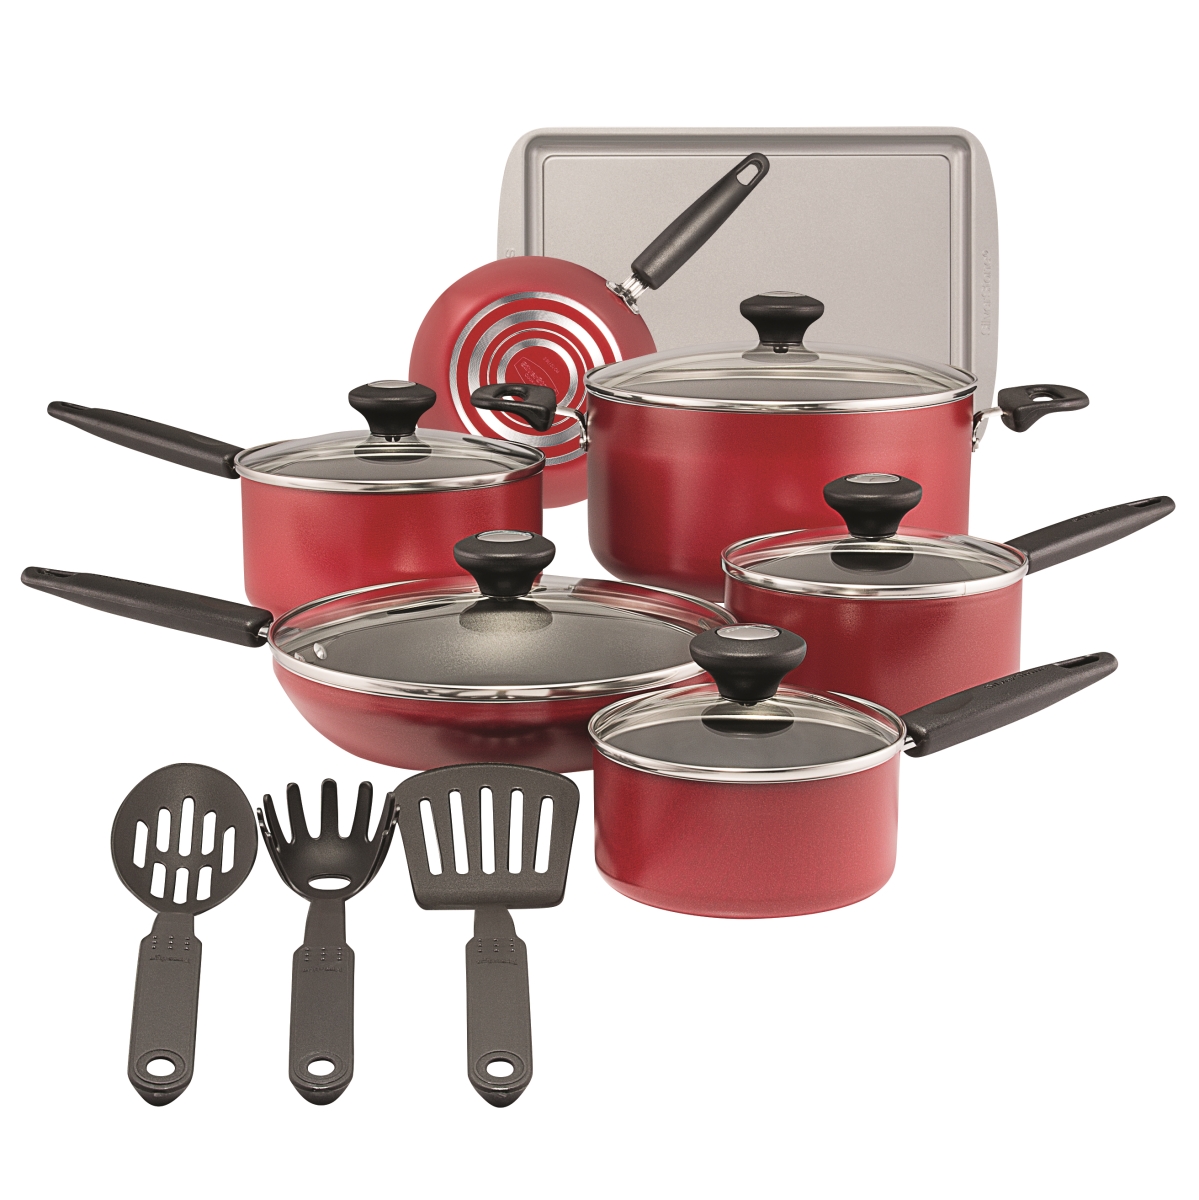 22034 Culinary Colors Aluminum Nonstick Cookware Set, Red - 15 Piece